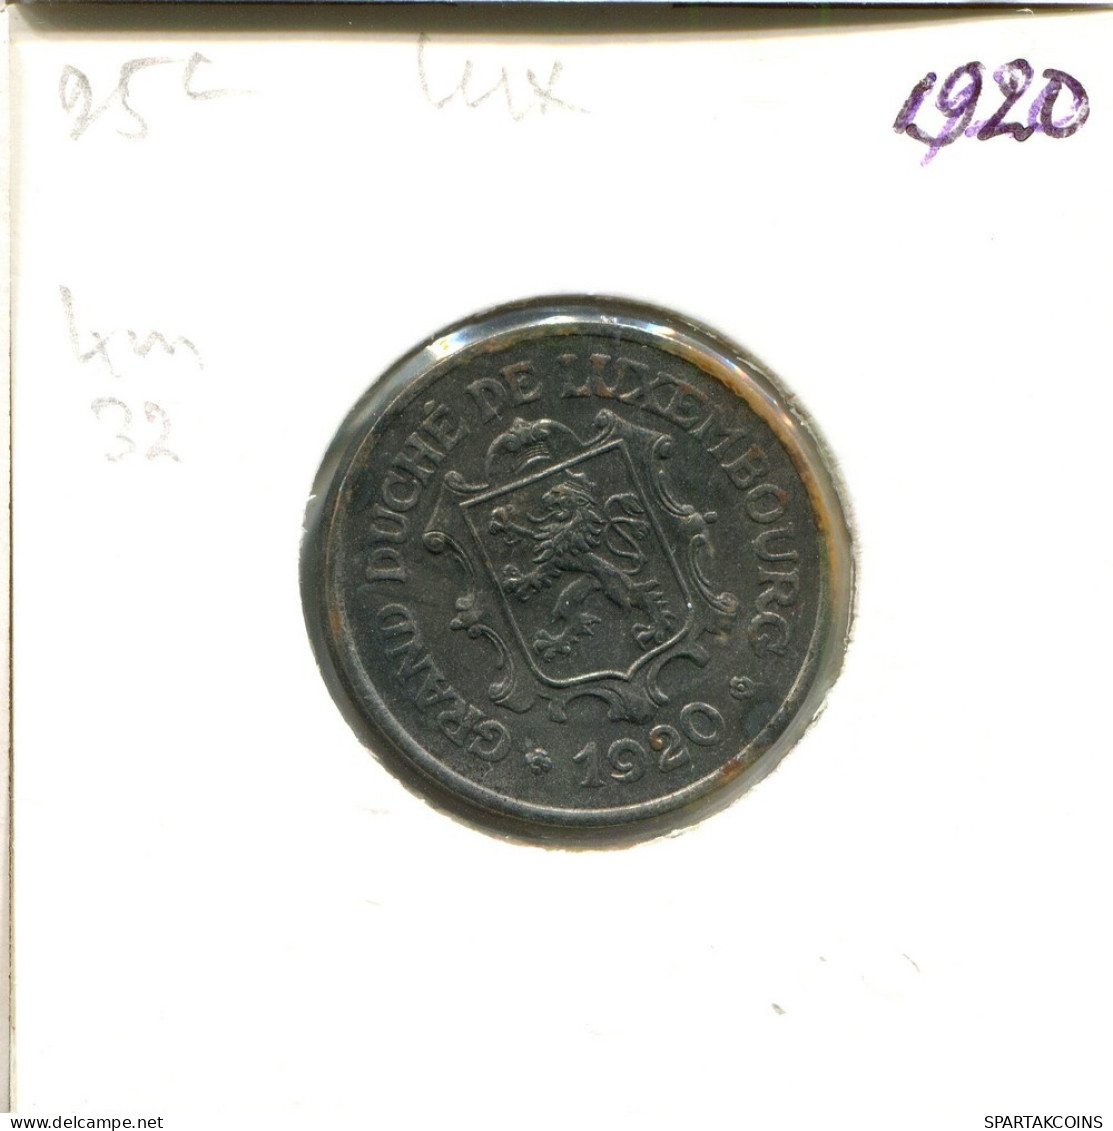 25 CENTIMES 1920 LUXEMBOURG Coin #AT186.U.A - Luxemburg